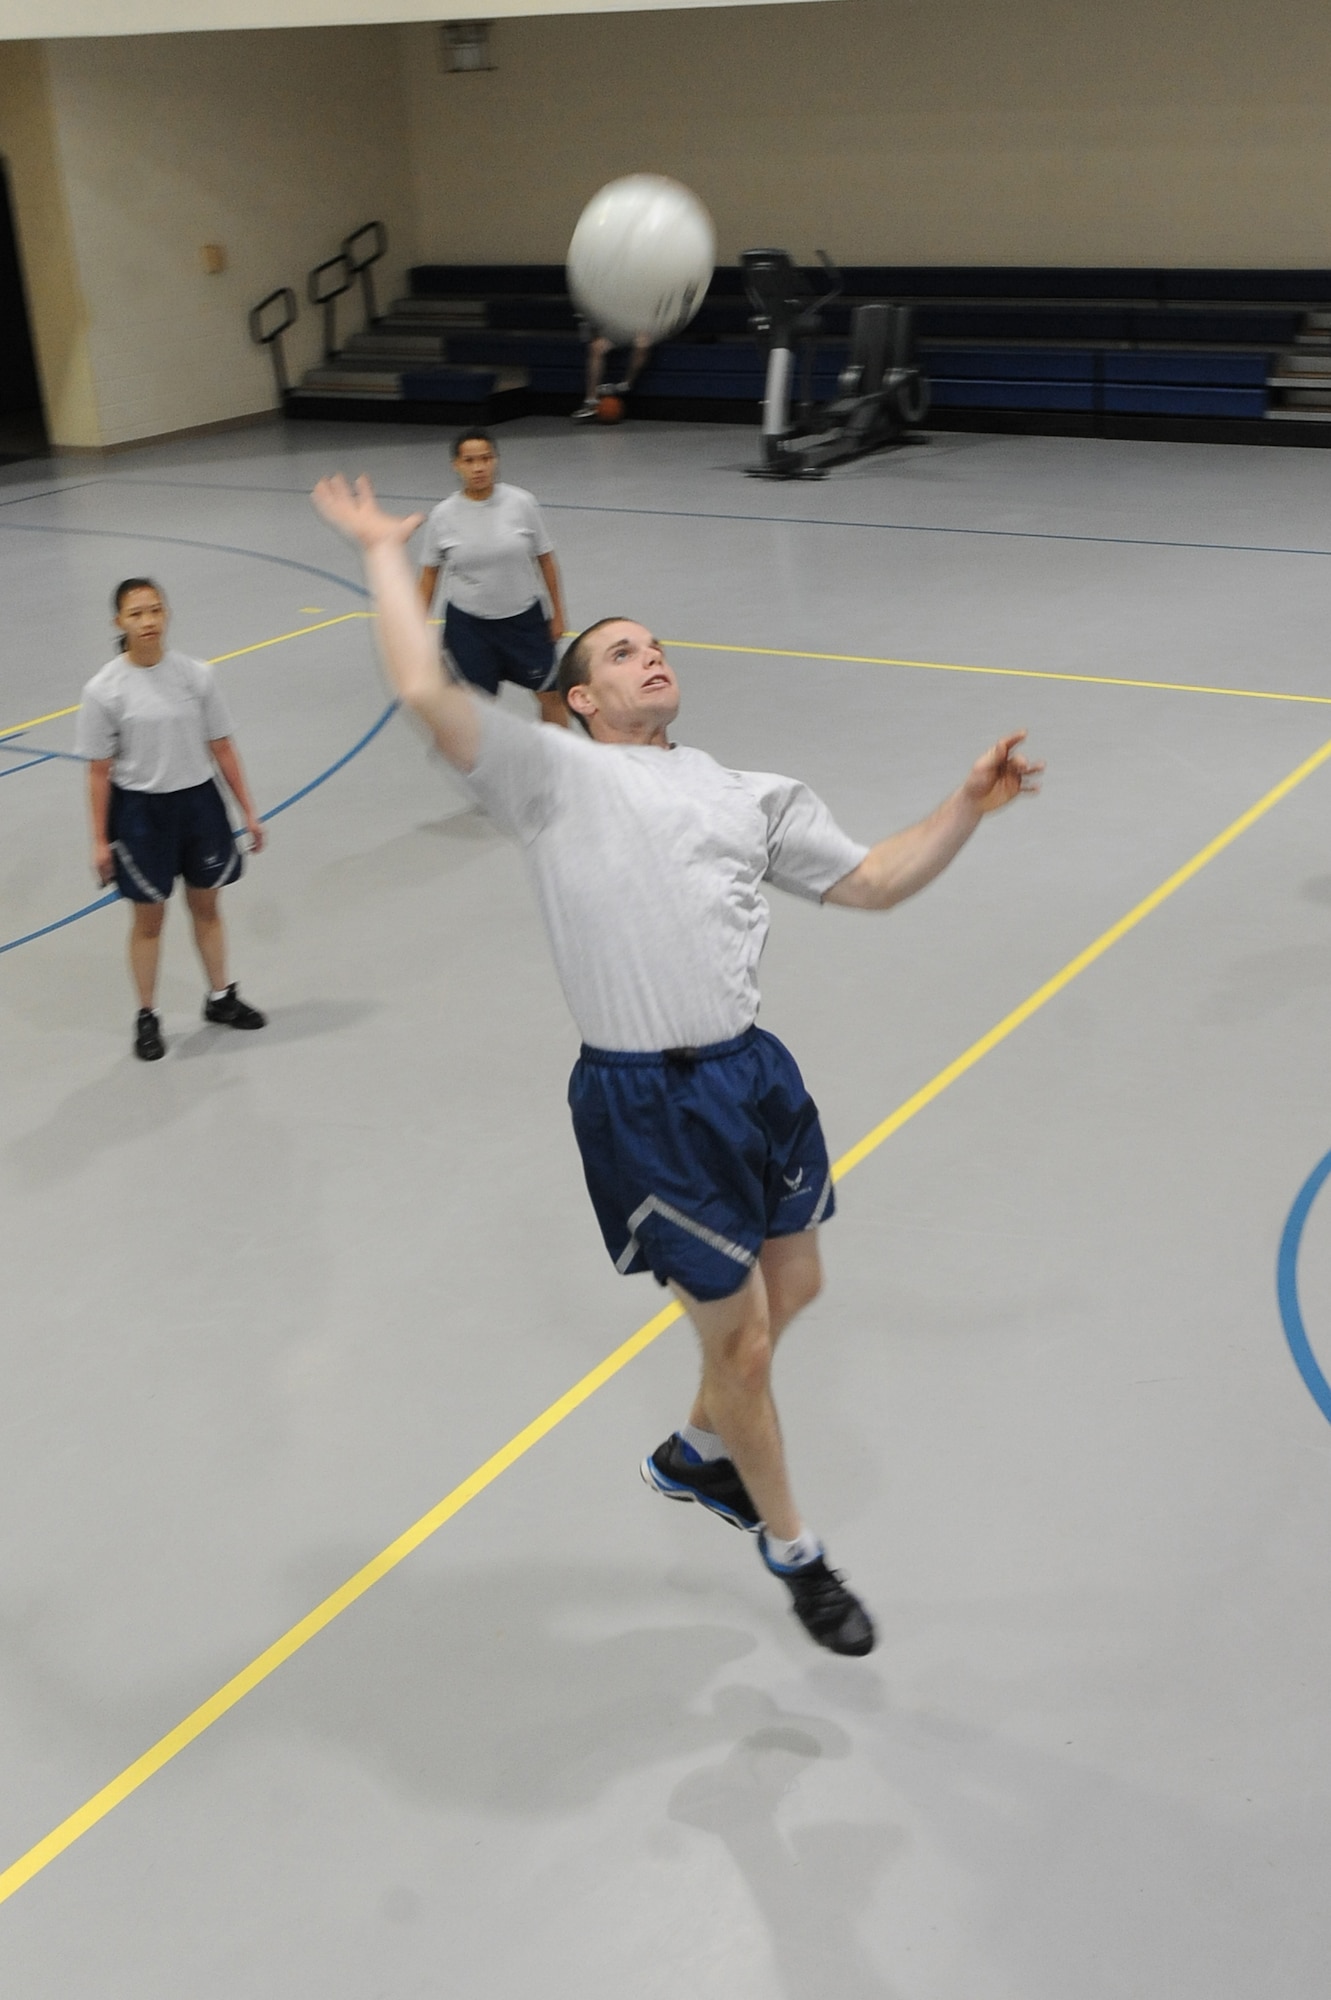 An Airman from the 2nd Comptroller Squadron jumps to hit a volleyball in the Fitness Center on Barksdale Air Force Base, La., Oct. 25. Many units around base meet at the gym for physical training. The Fitness Center offers a variety of sports for Airmen to play such as football, softball, dodgeball, walleyball, basketball, racquetball, kickball and volleyball. (U.S. Air Force photo/Senior Airman Micaiah Anthony)(RELEASED)
